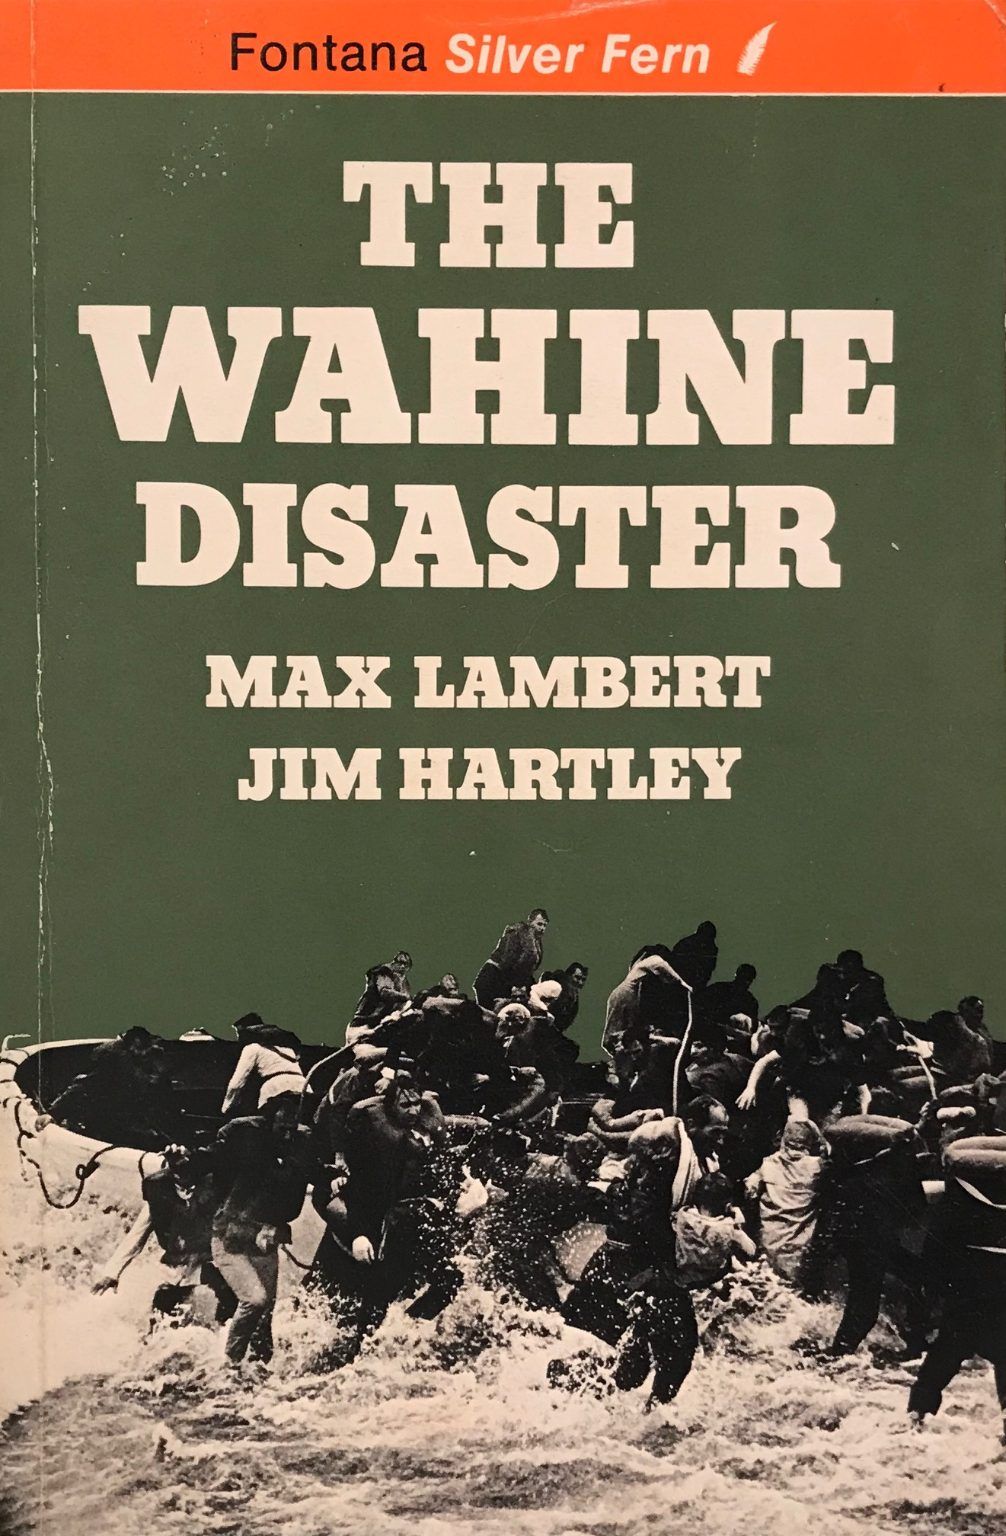 THE WAHINE DISASTER